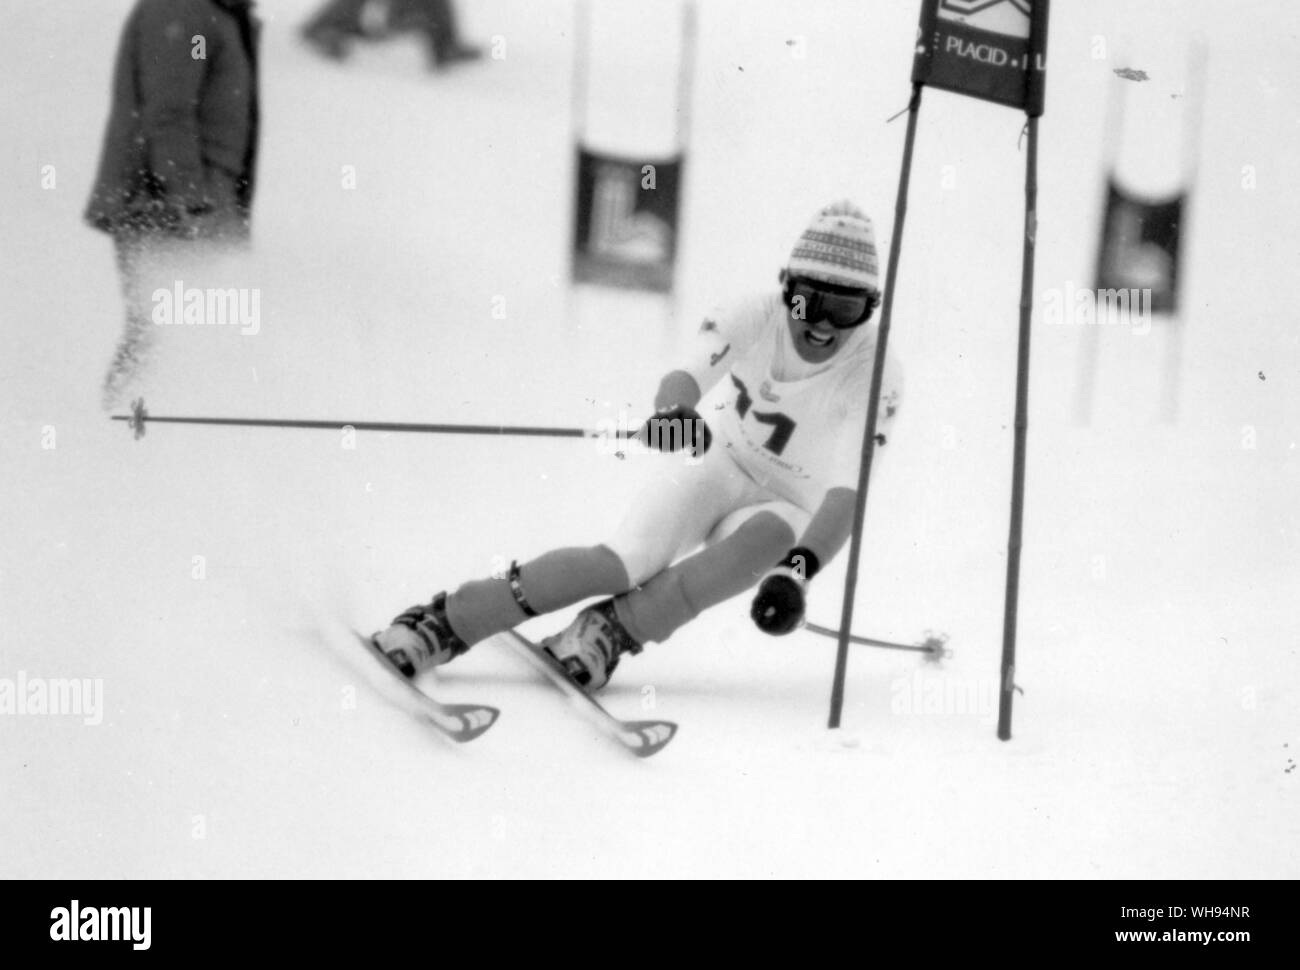 1980 Winter Olympics - Lake Placid, USA. Andreas Wenzel in the mens alpine giant slalom skiing event winning a second silver medal for Liechtenstein. 19 February 1980. Stock Photo